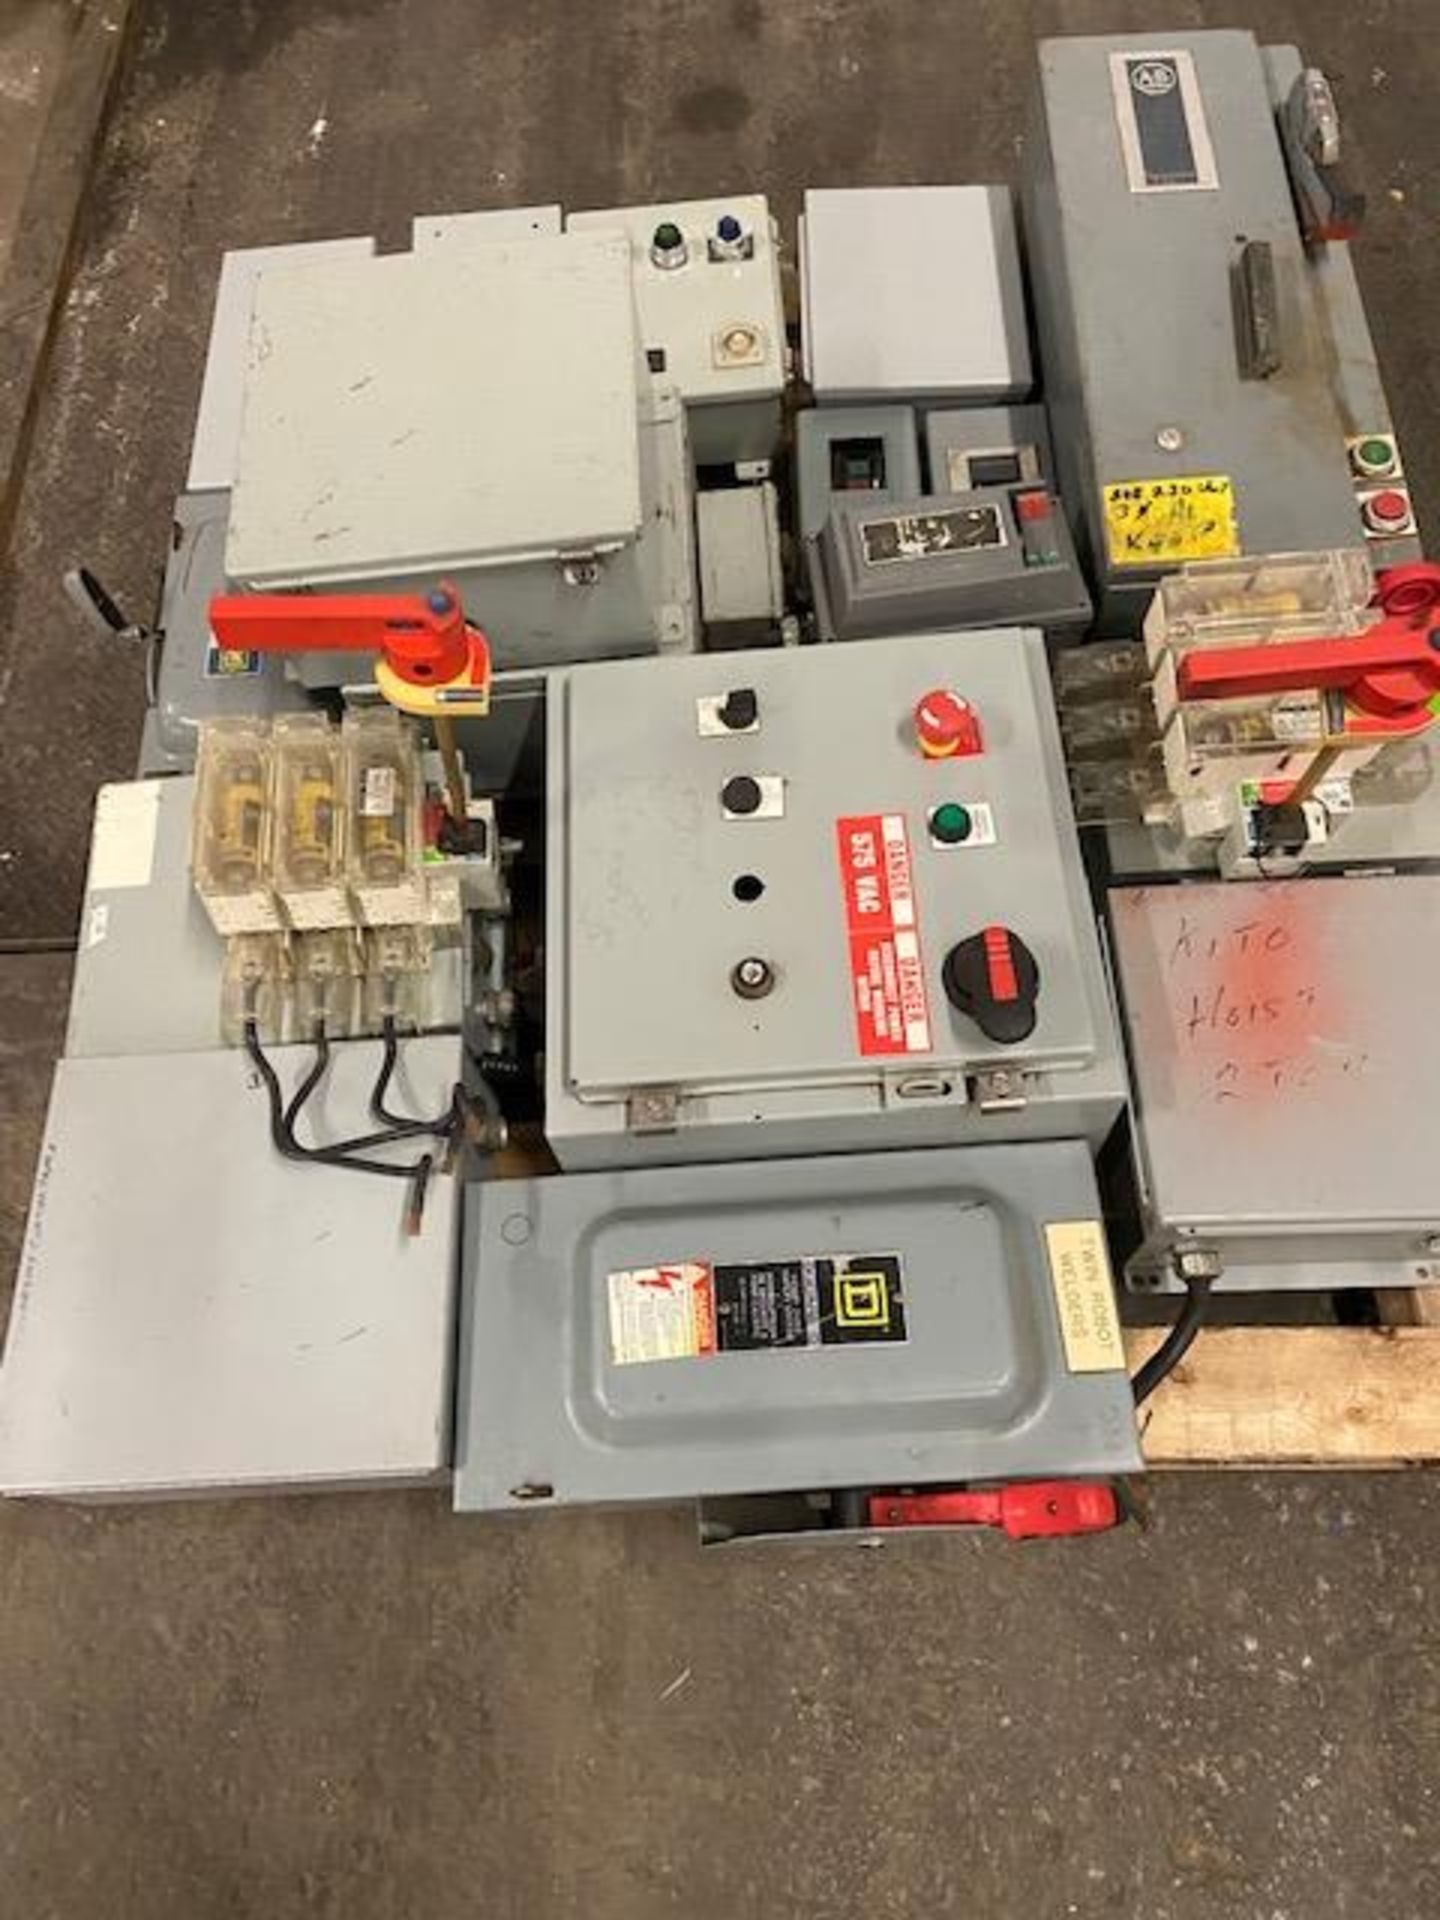 Lot of large electrical units - switches, fuses, Square D breaker and more